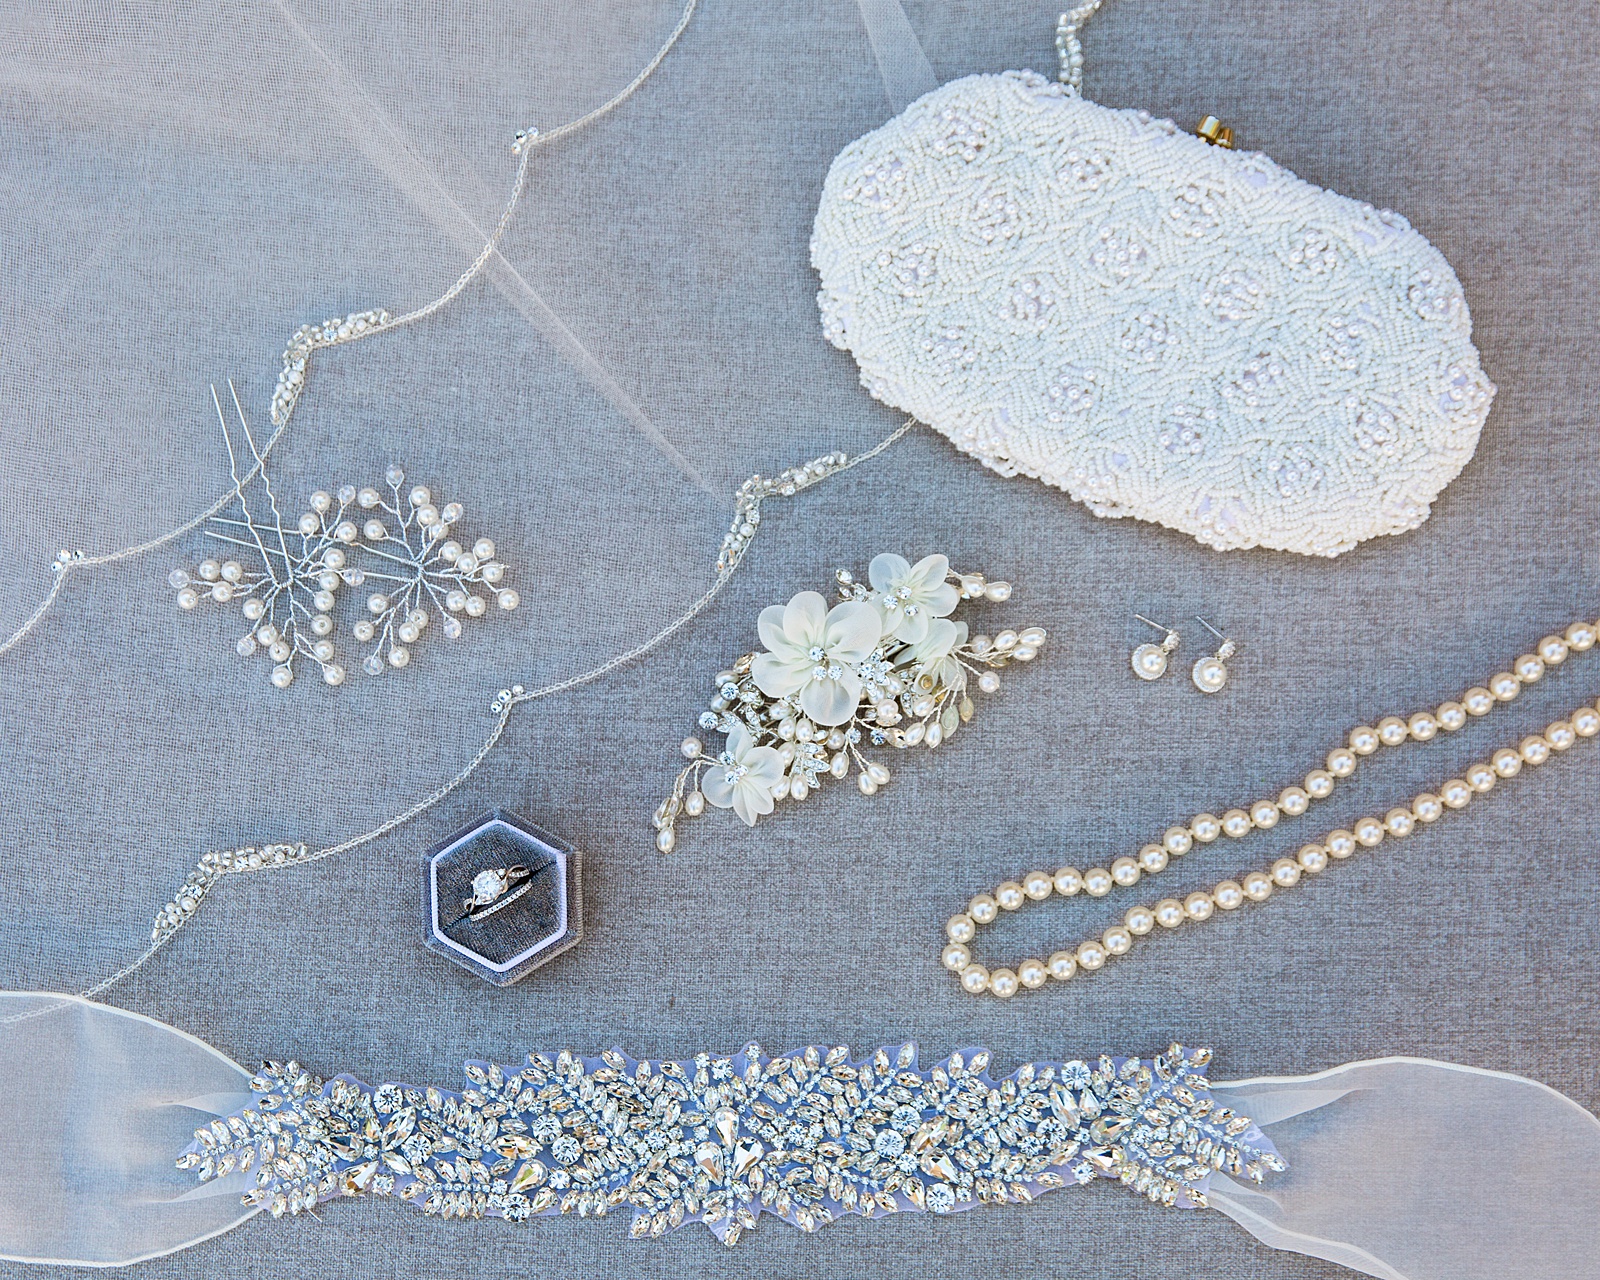 Bride's white wedding day details including a crystal sash and pearl jewelry by PMA Photography.